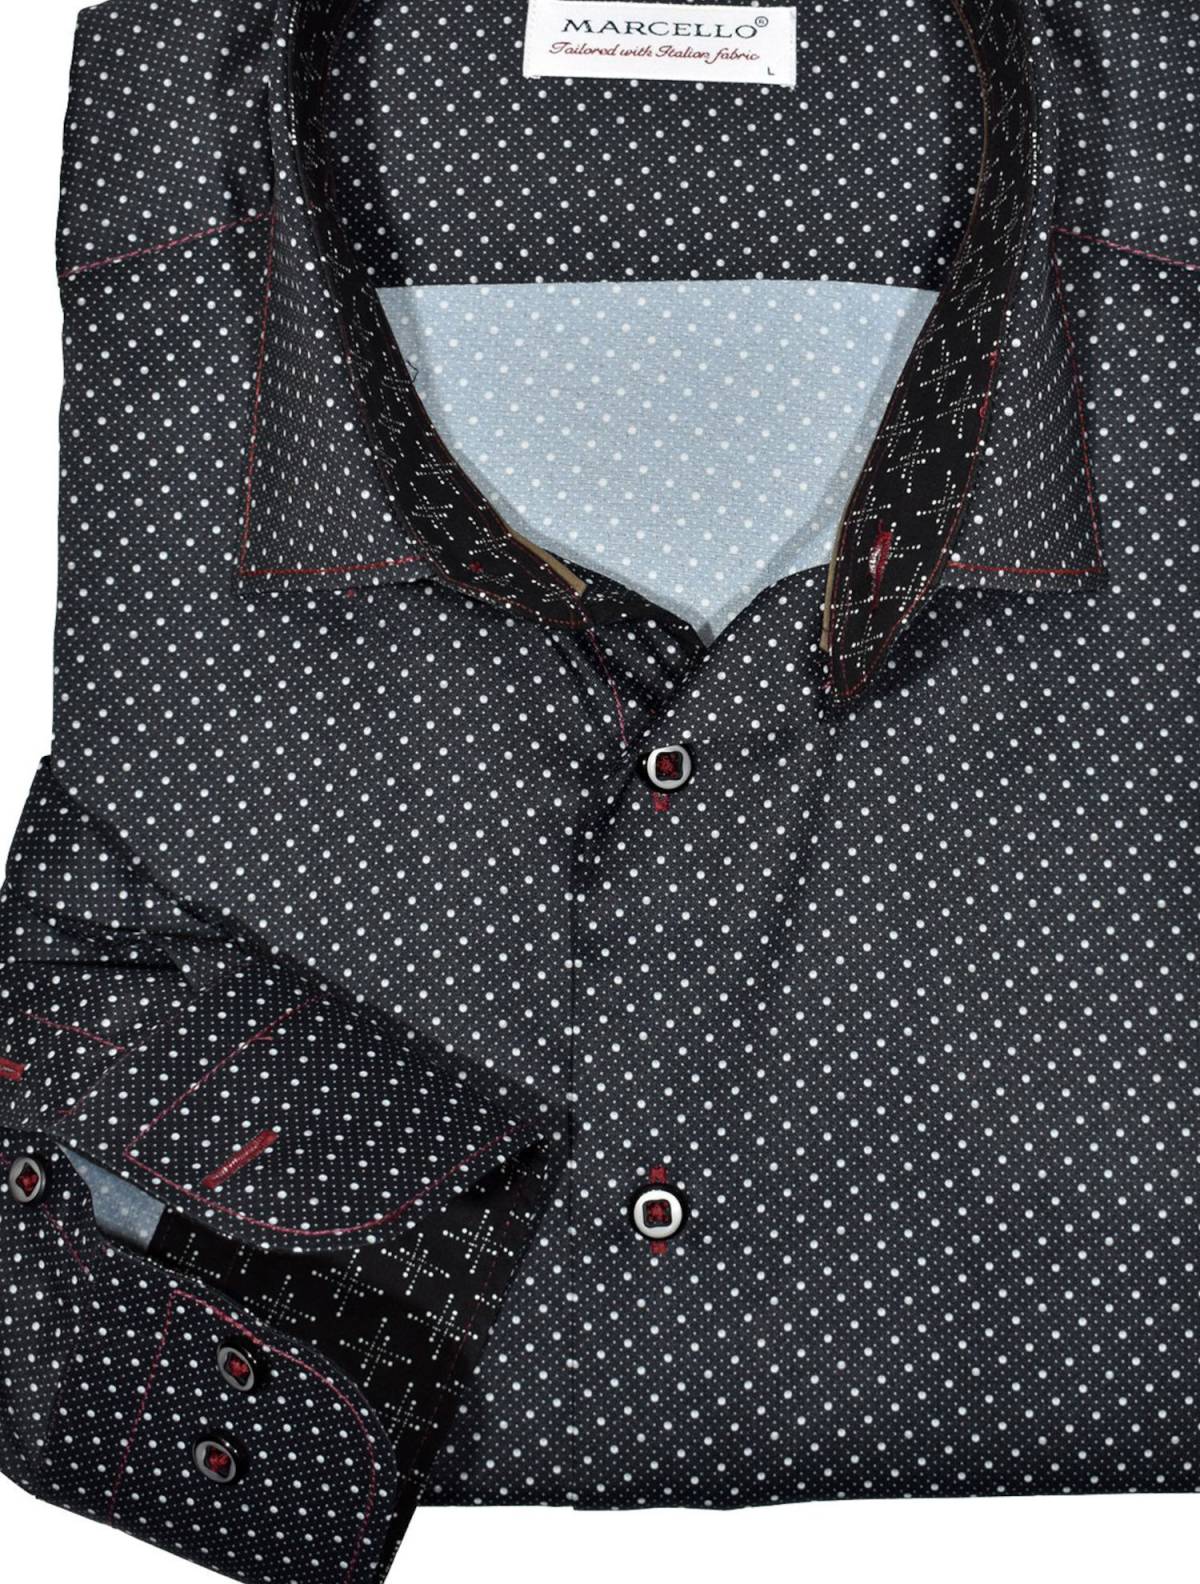 Cotton microfiber fabric feels like fine silk and when coupled with a fine dot pattern you have a fantastic shirt for that special occasion.   Cool contrast red trim and hand selected buttons. Second cuff placket button for the perfect cuff turn up.  Silk like cotton microfiber fabric feels outstanding and light.  Classic shaped fit, perfect for a medium build.